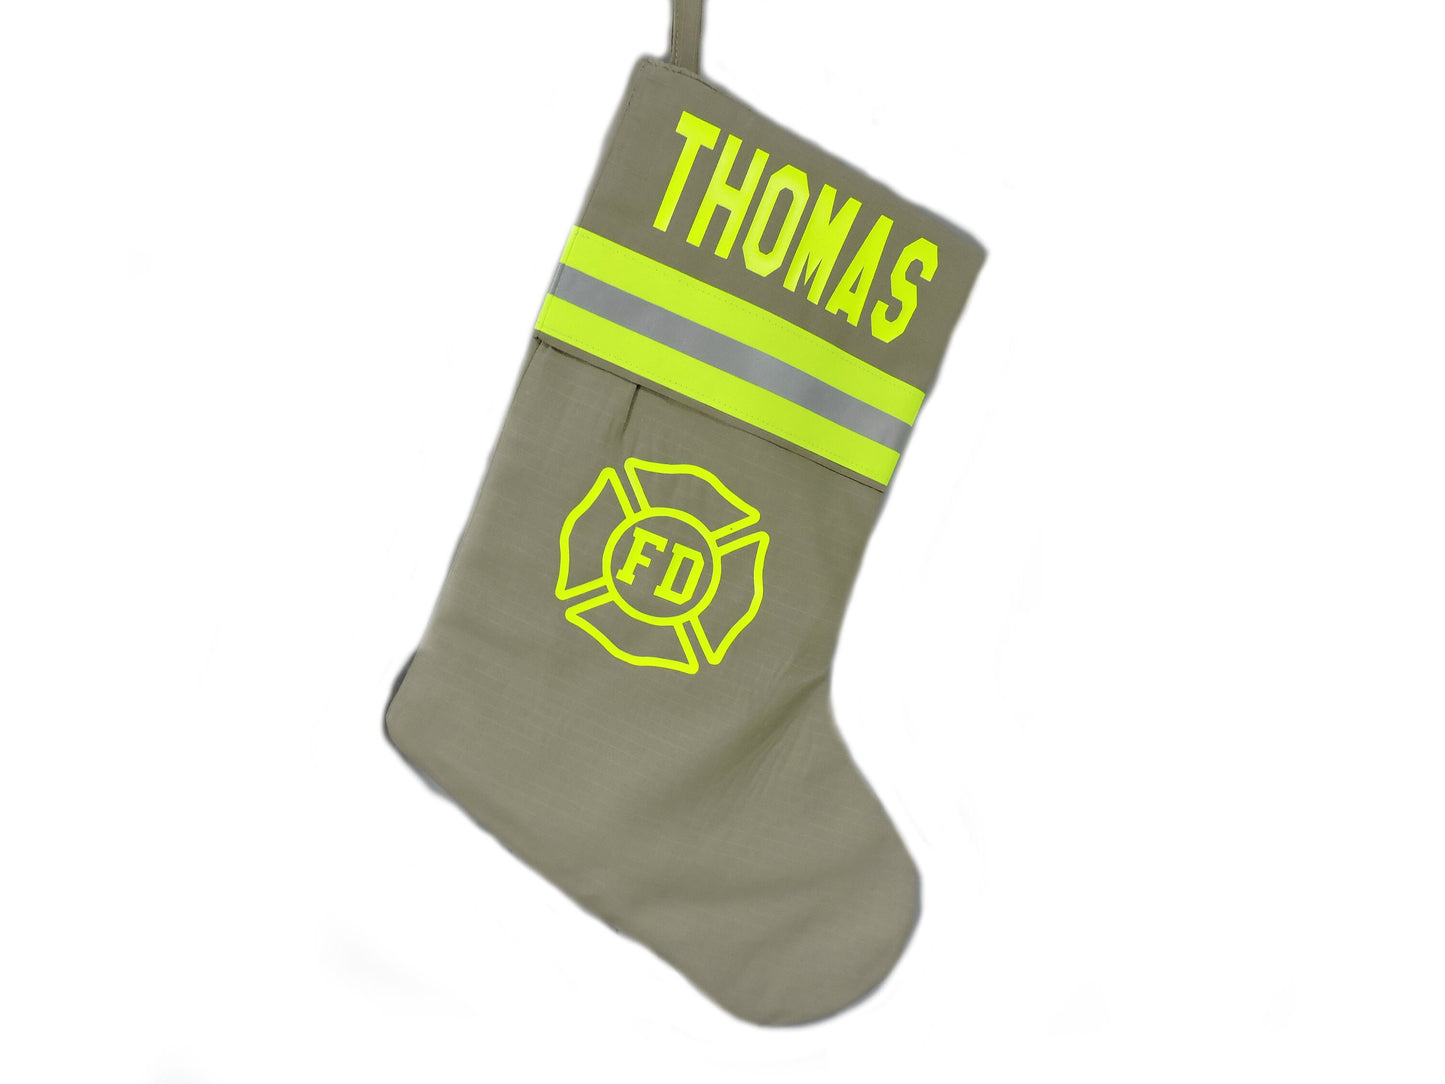 Tan Fabric Neon Yellow Reflective Tape Firefighter Christmas stocking with maltese cross